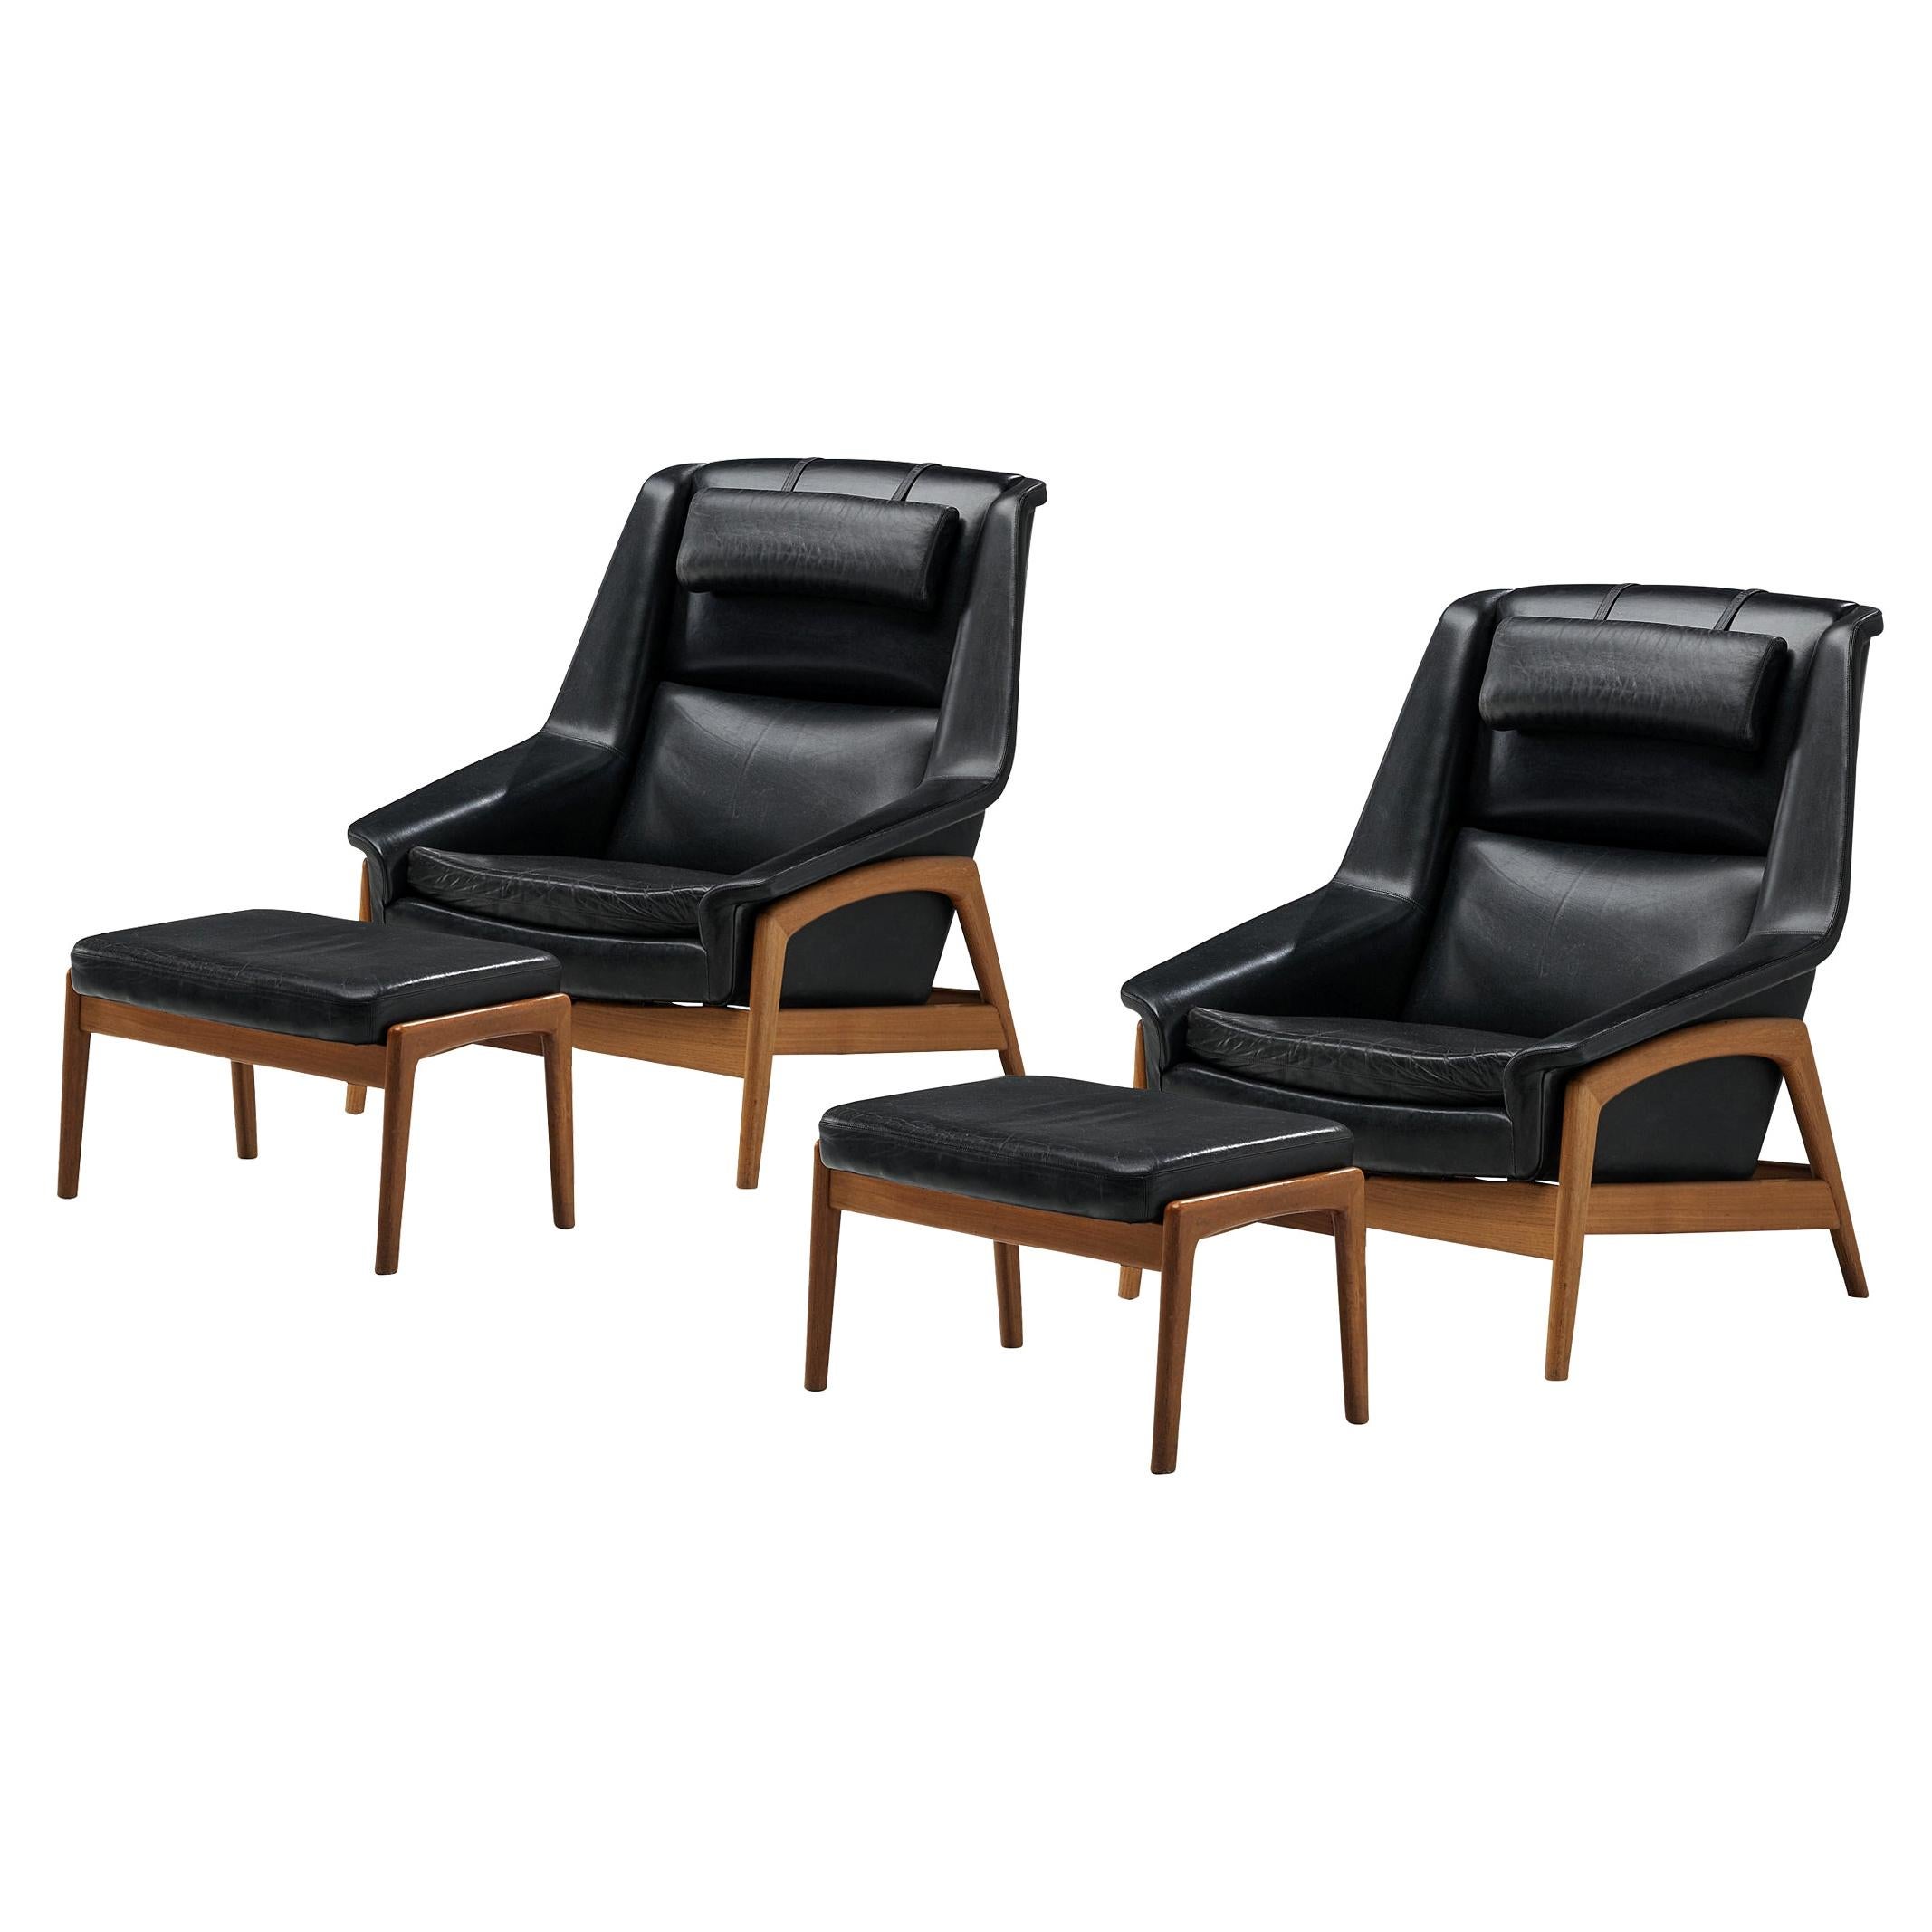 Folke Ohlsson Pair of 'Profil' Lounge Chairs in Black Leather